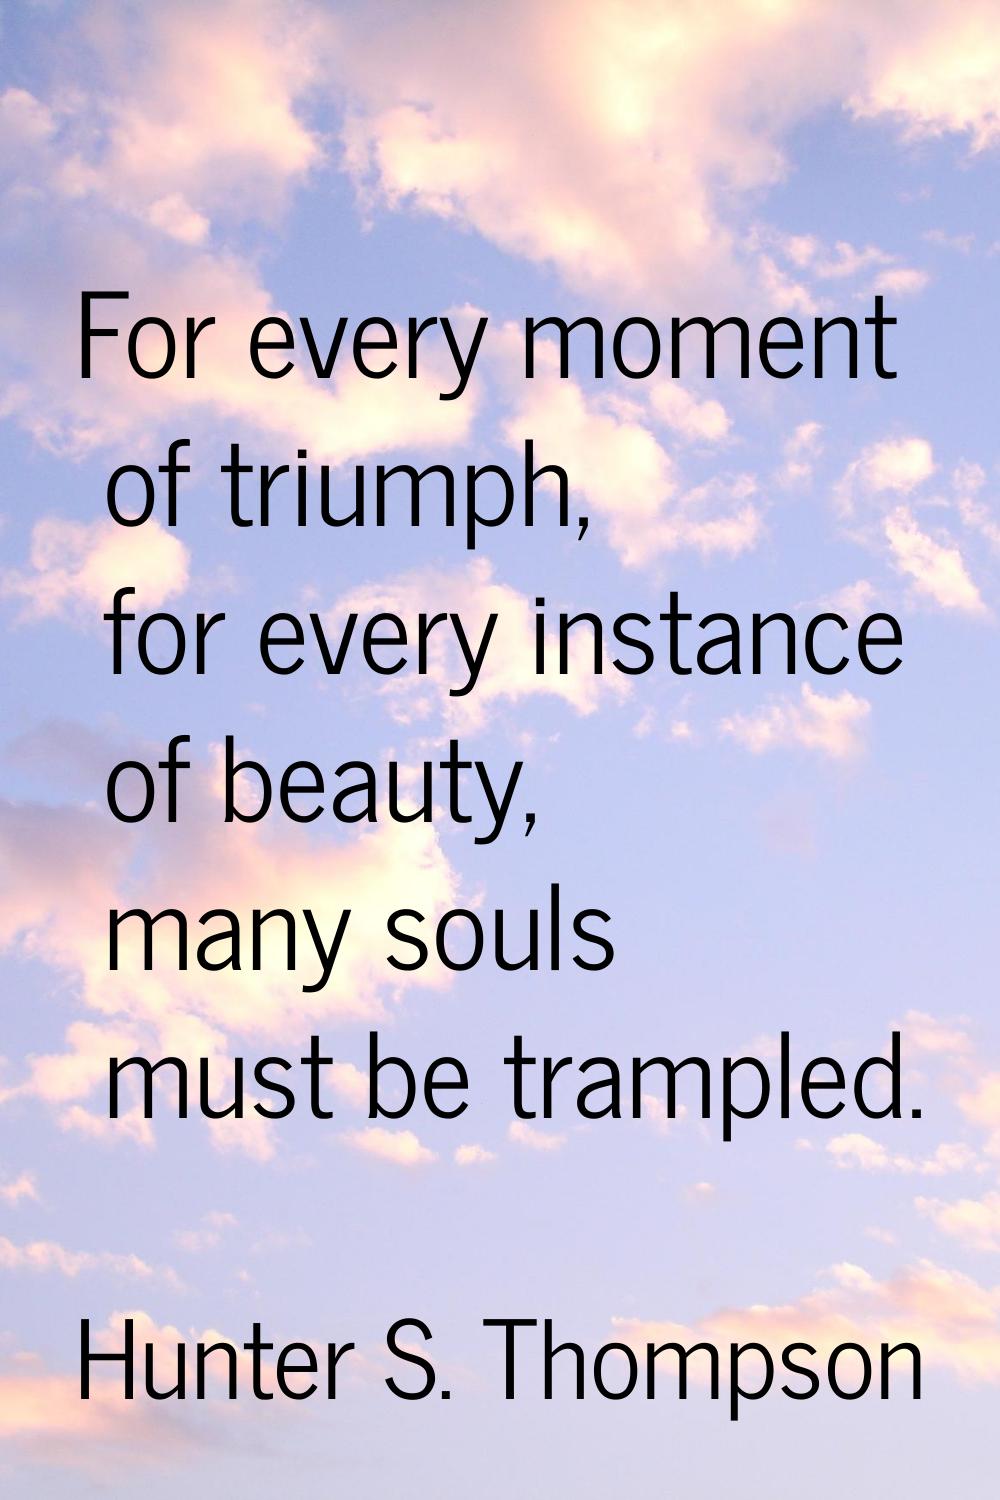 For every moment of triumph, for every instance of beauty, many souls must be trampled.